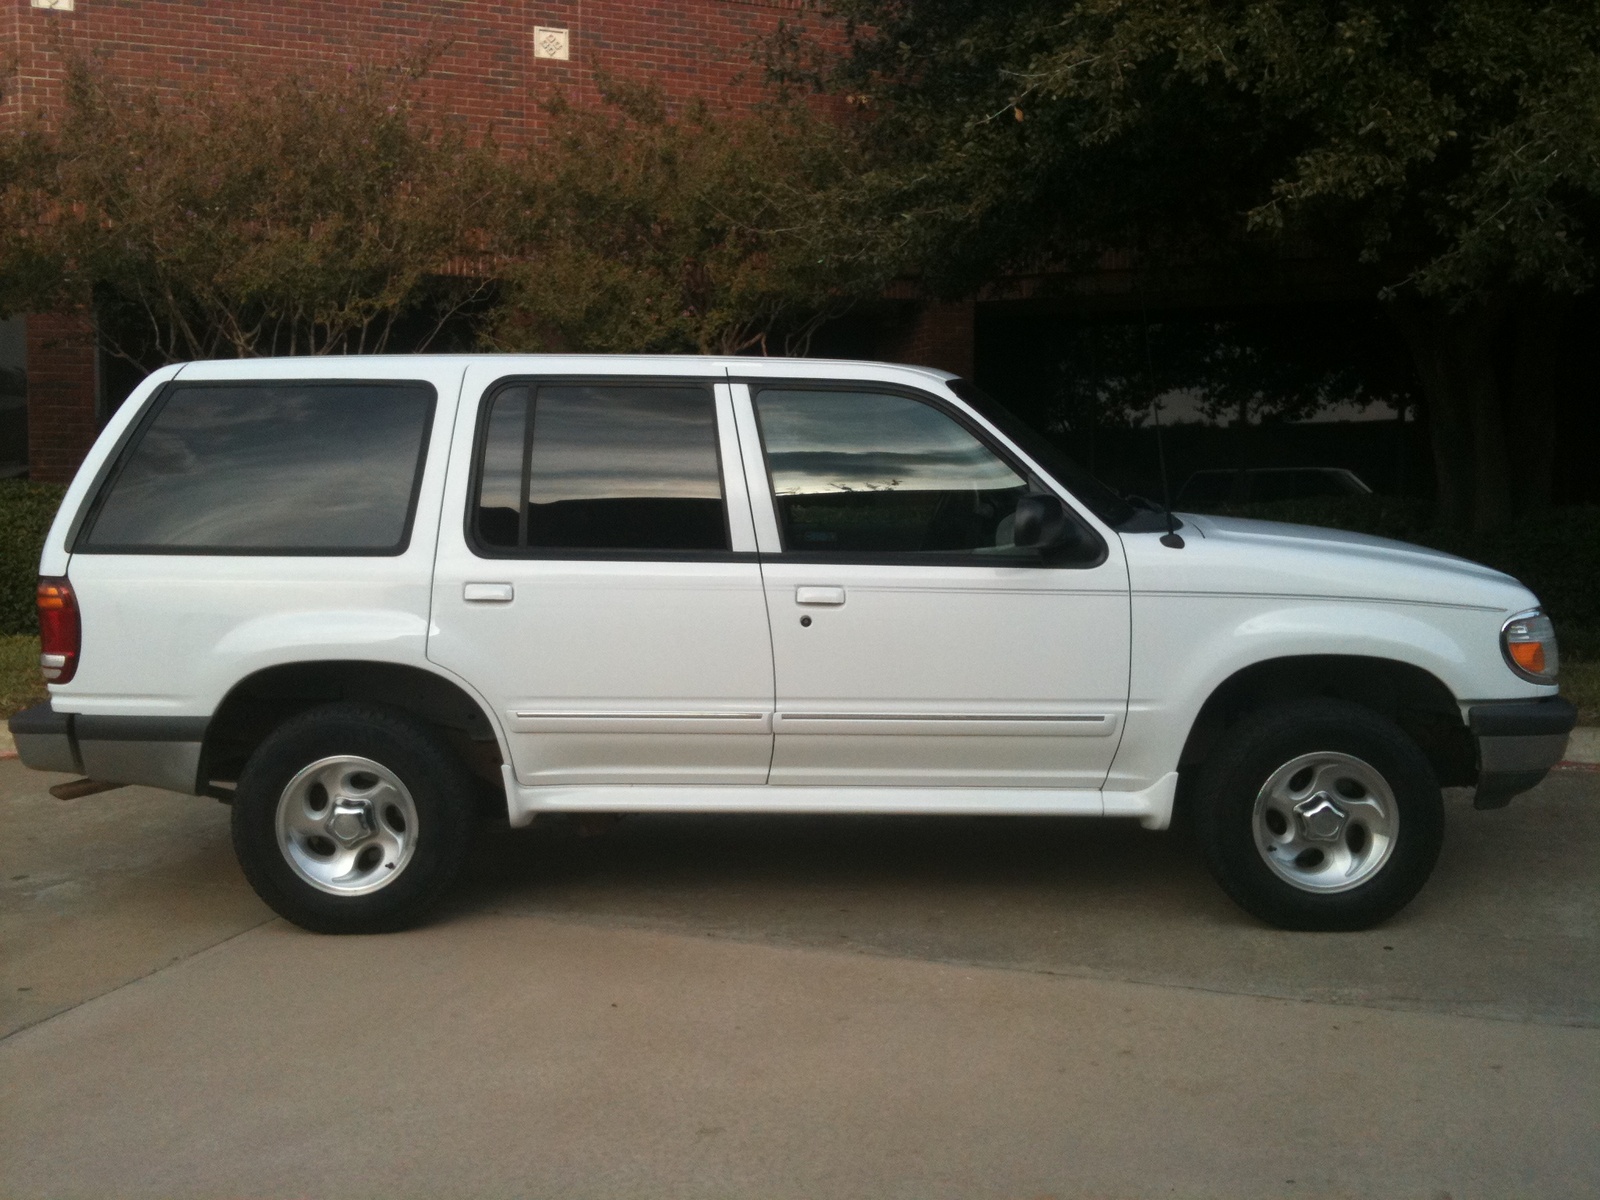 1998 Ford explorer limited reviews #5